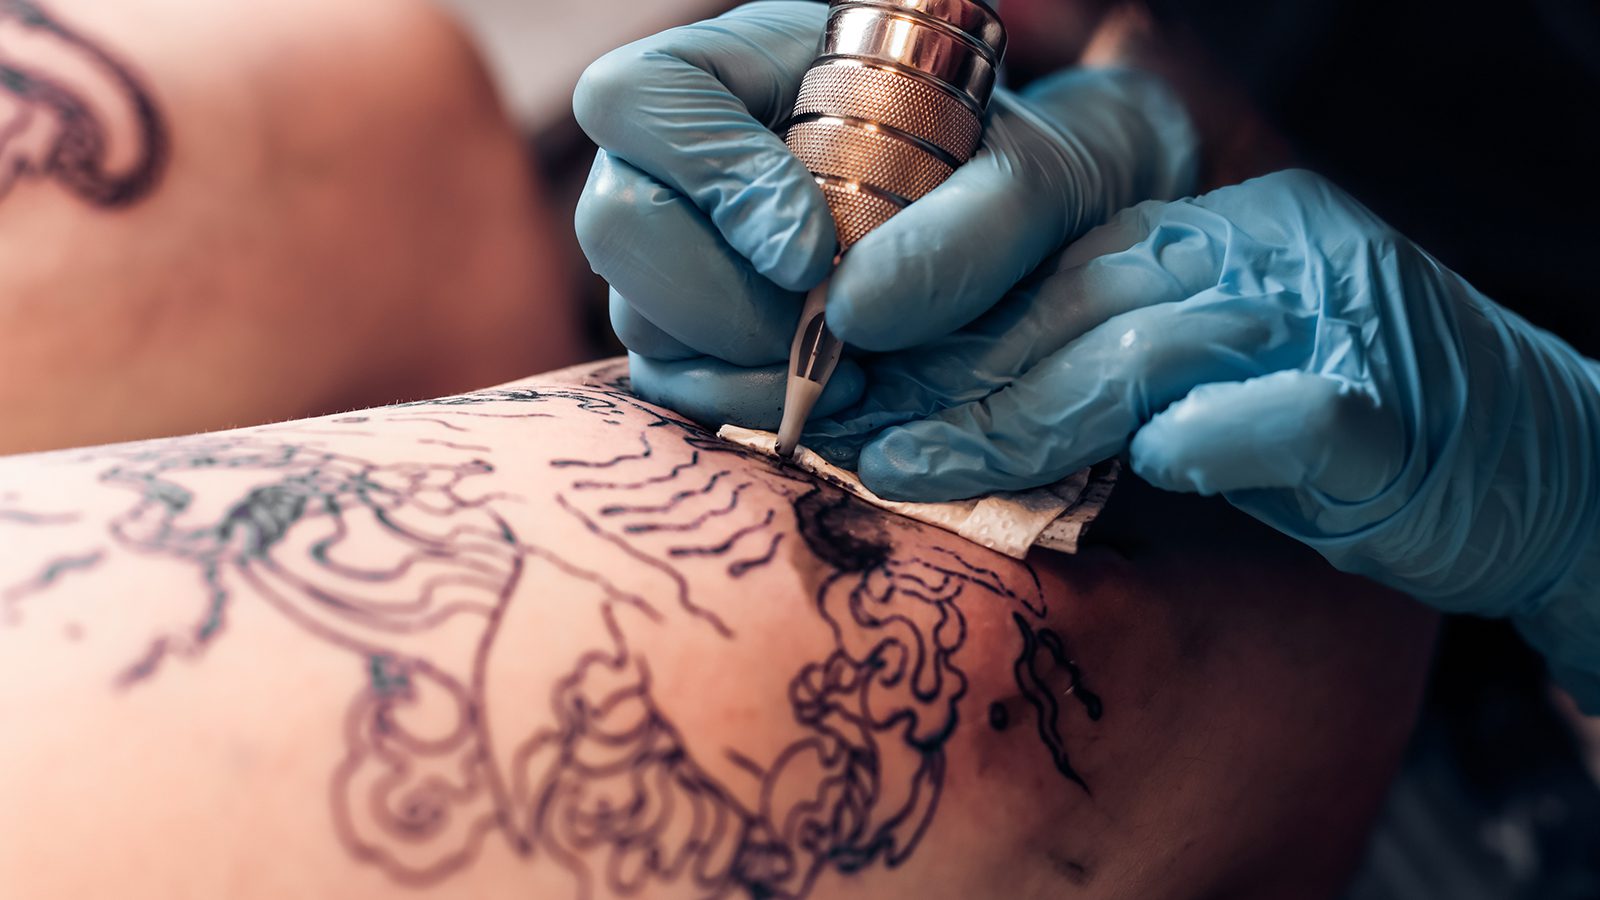 Study Reveals That People with Tattoos and Piercings Often Had Childhood Abuse